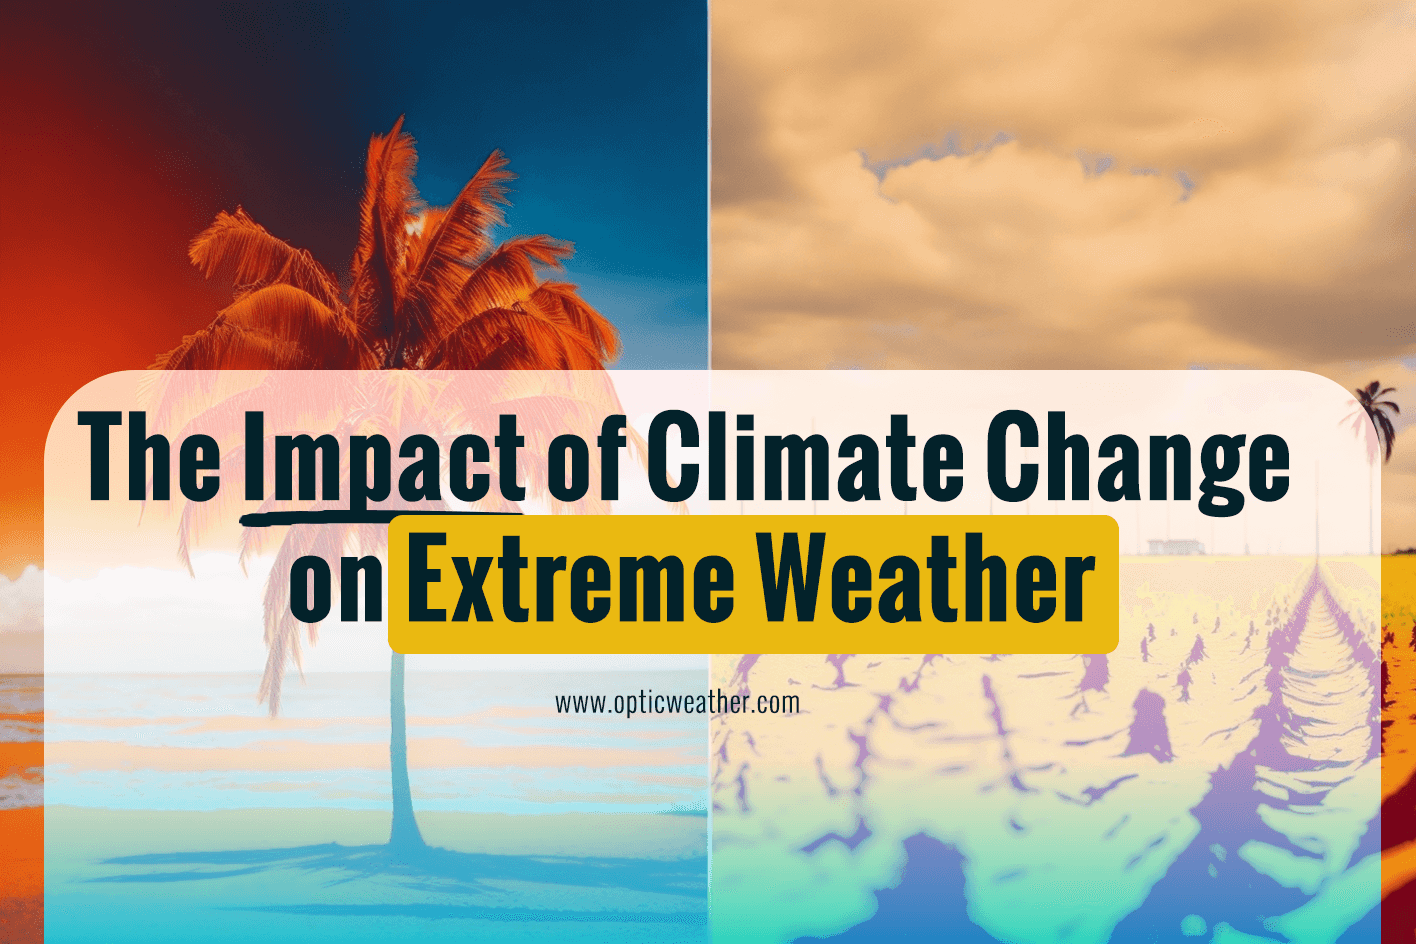 Understanding the Link between Climate Change and Extreme Weather